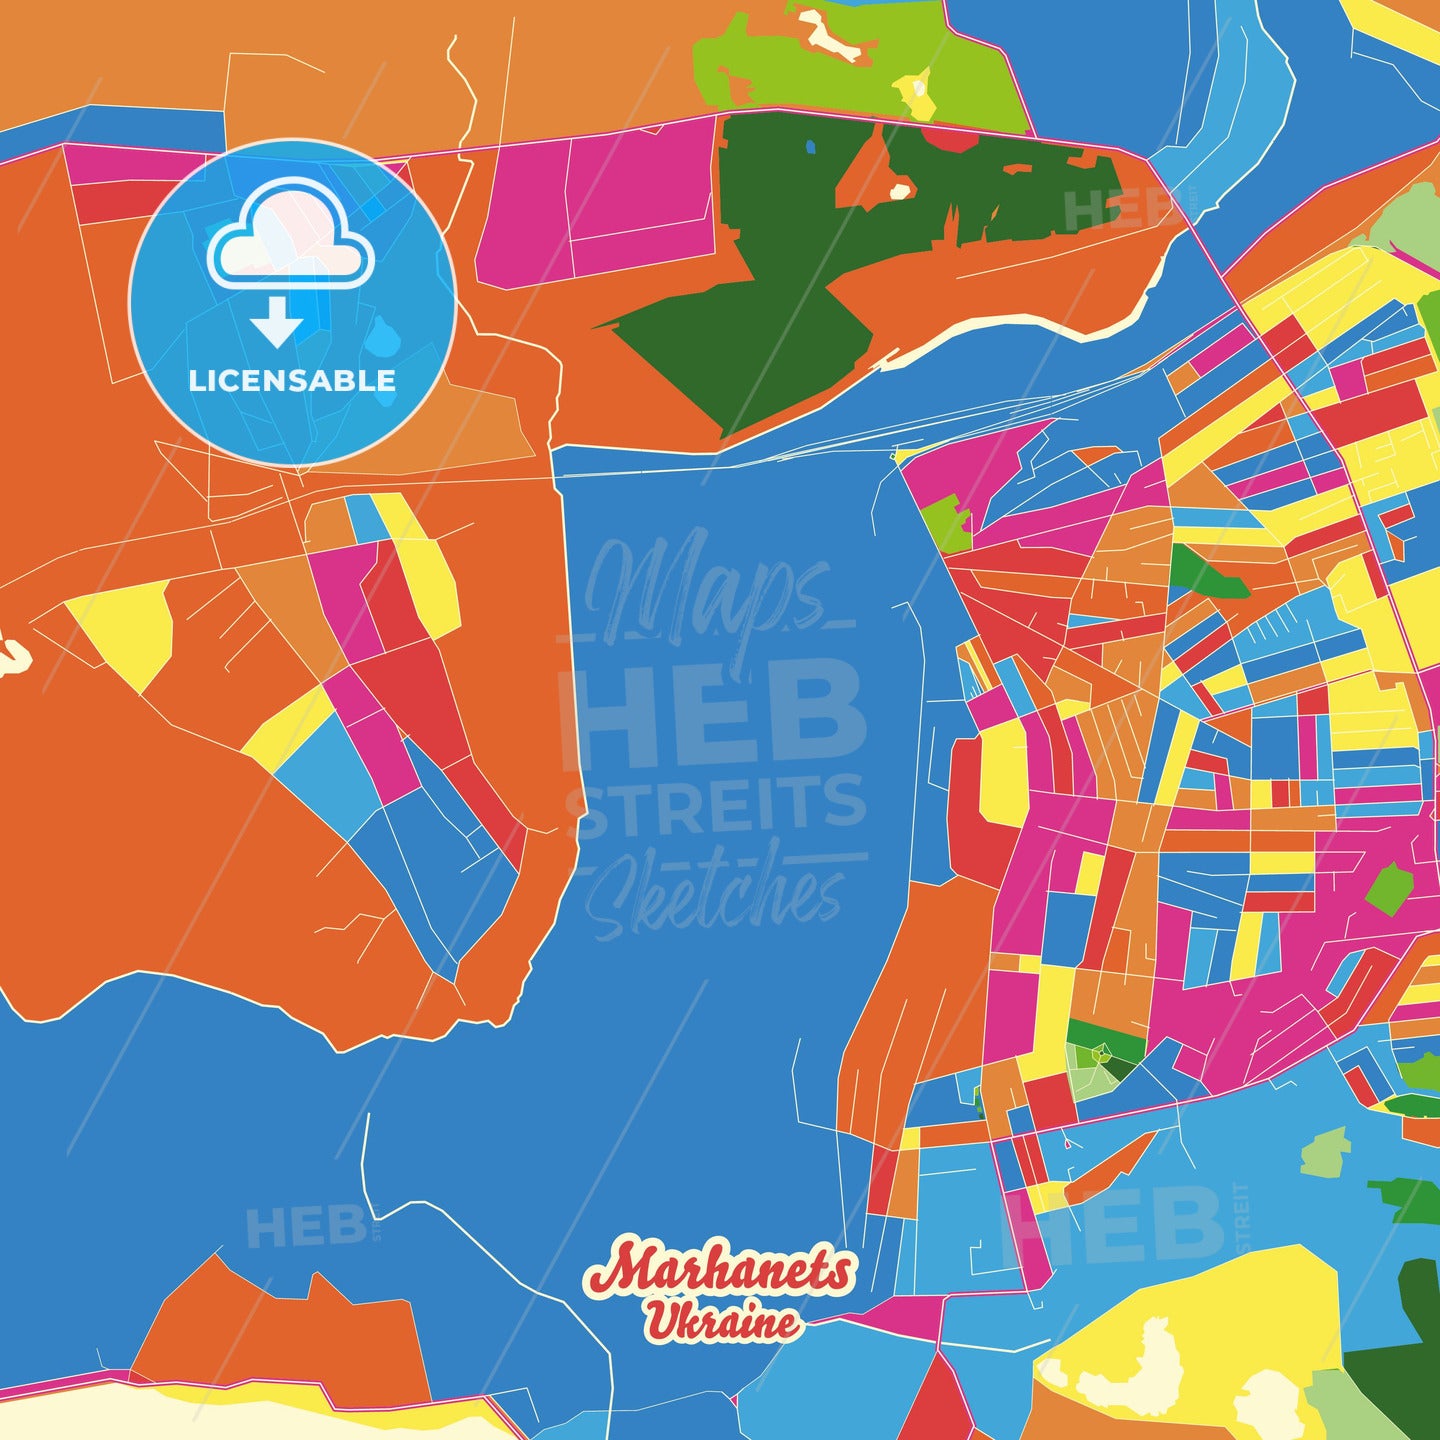 Marhanets, Ukraine Crazy Colorful Street Map Poster Template - HEBSTREITS Sketches